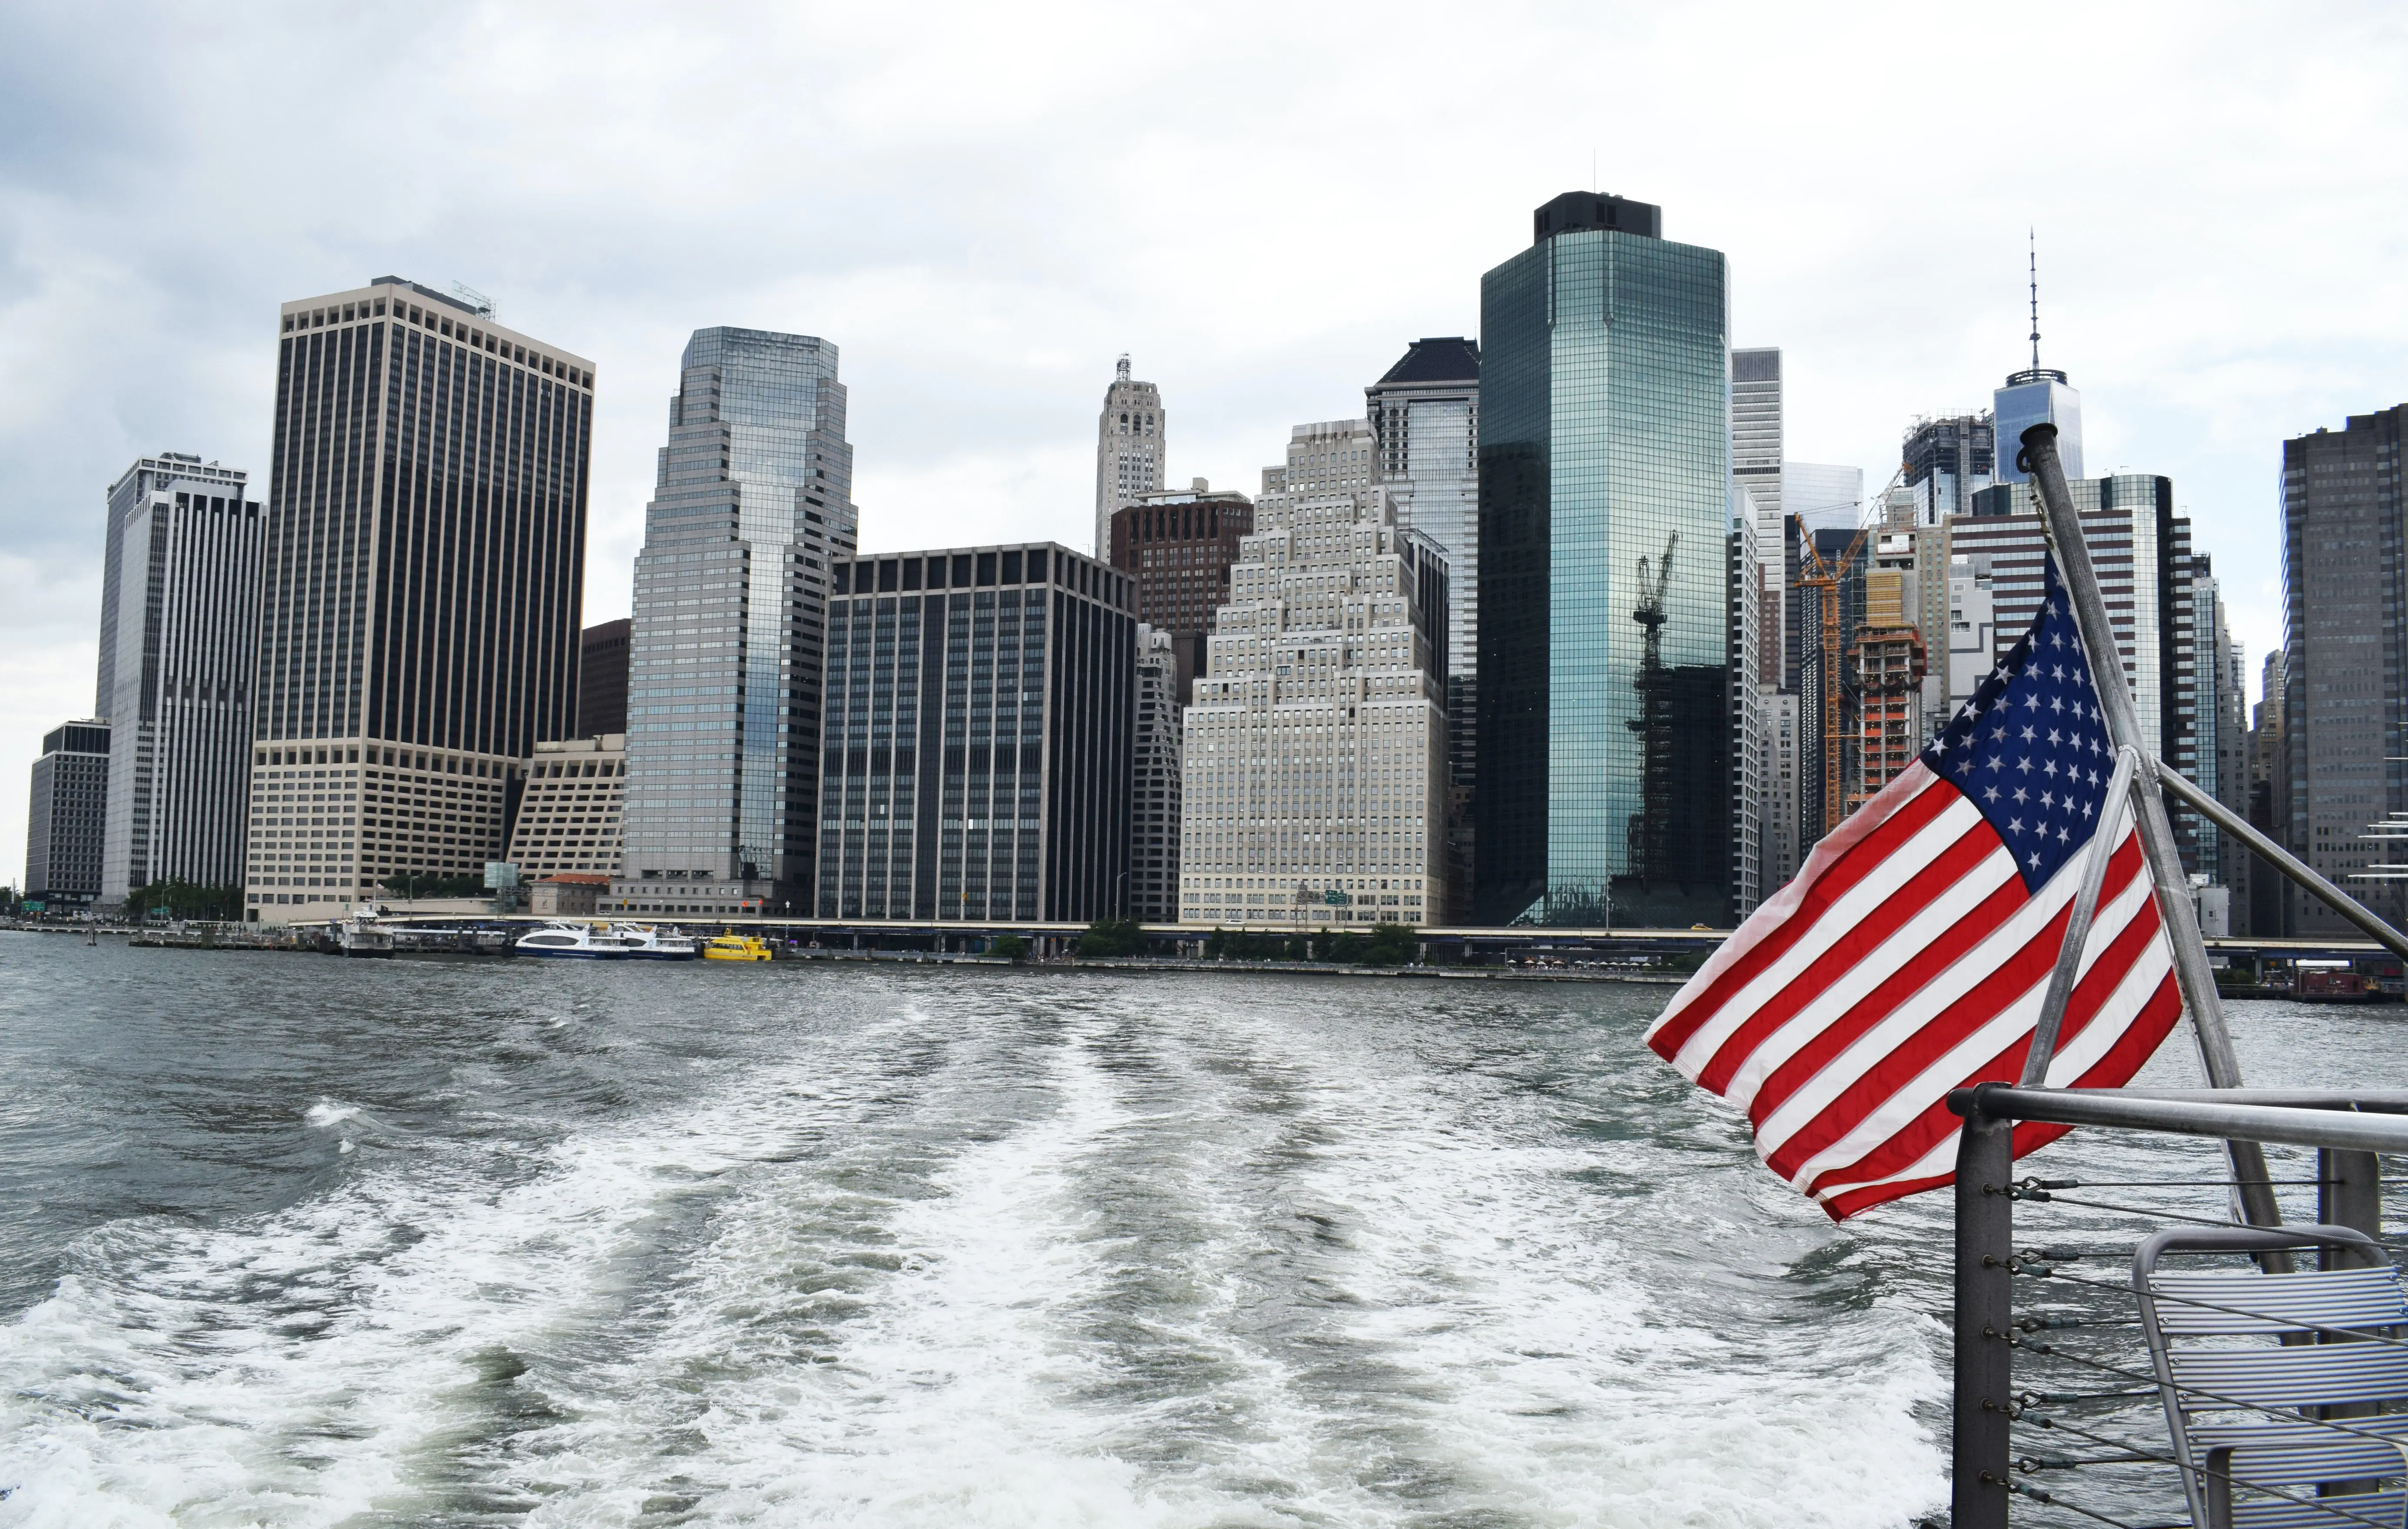 Dinner cruise during 1 week in New York city